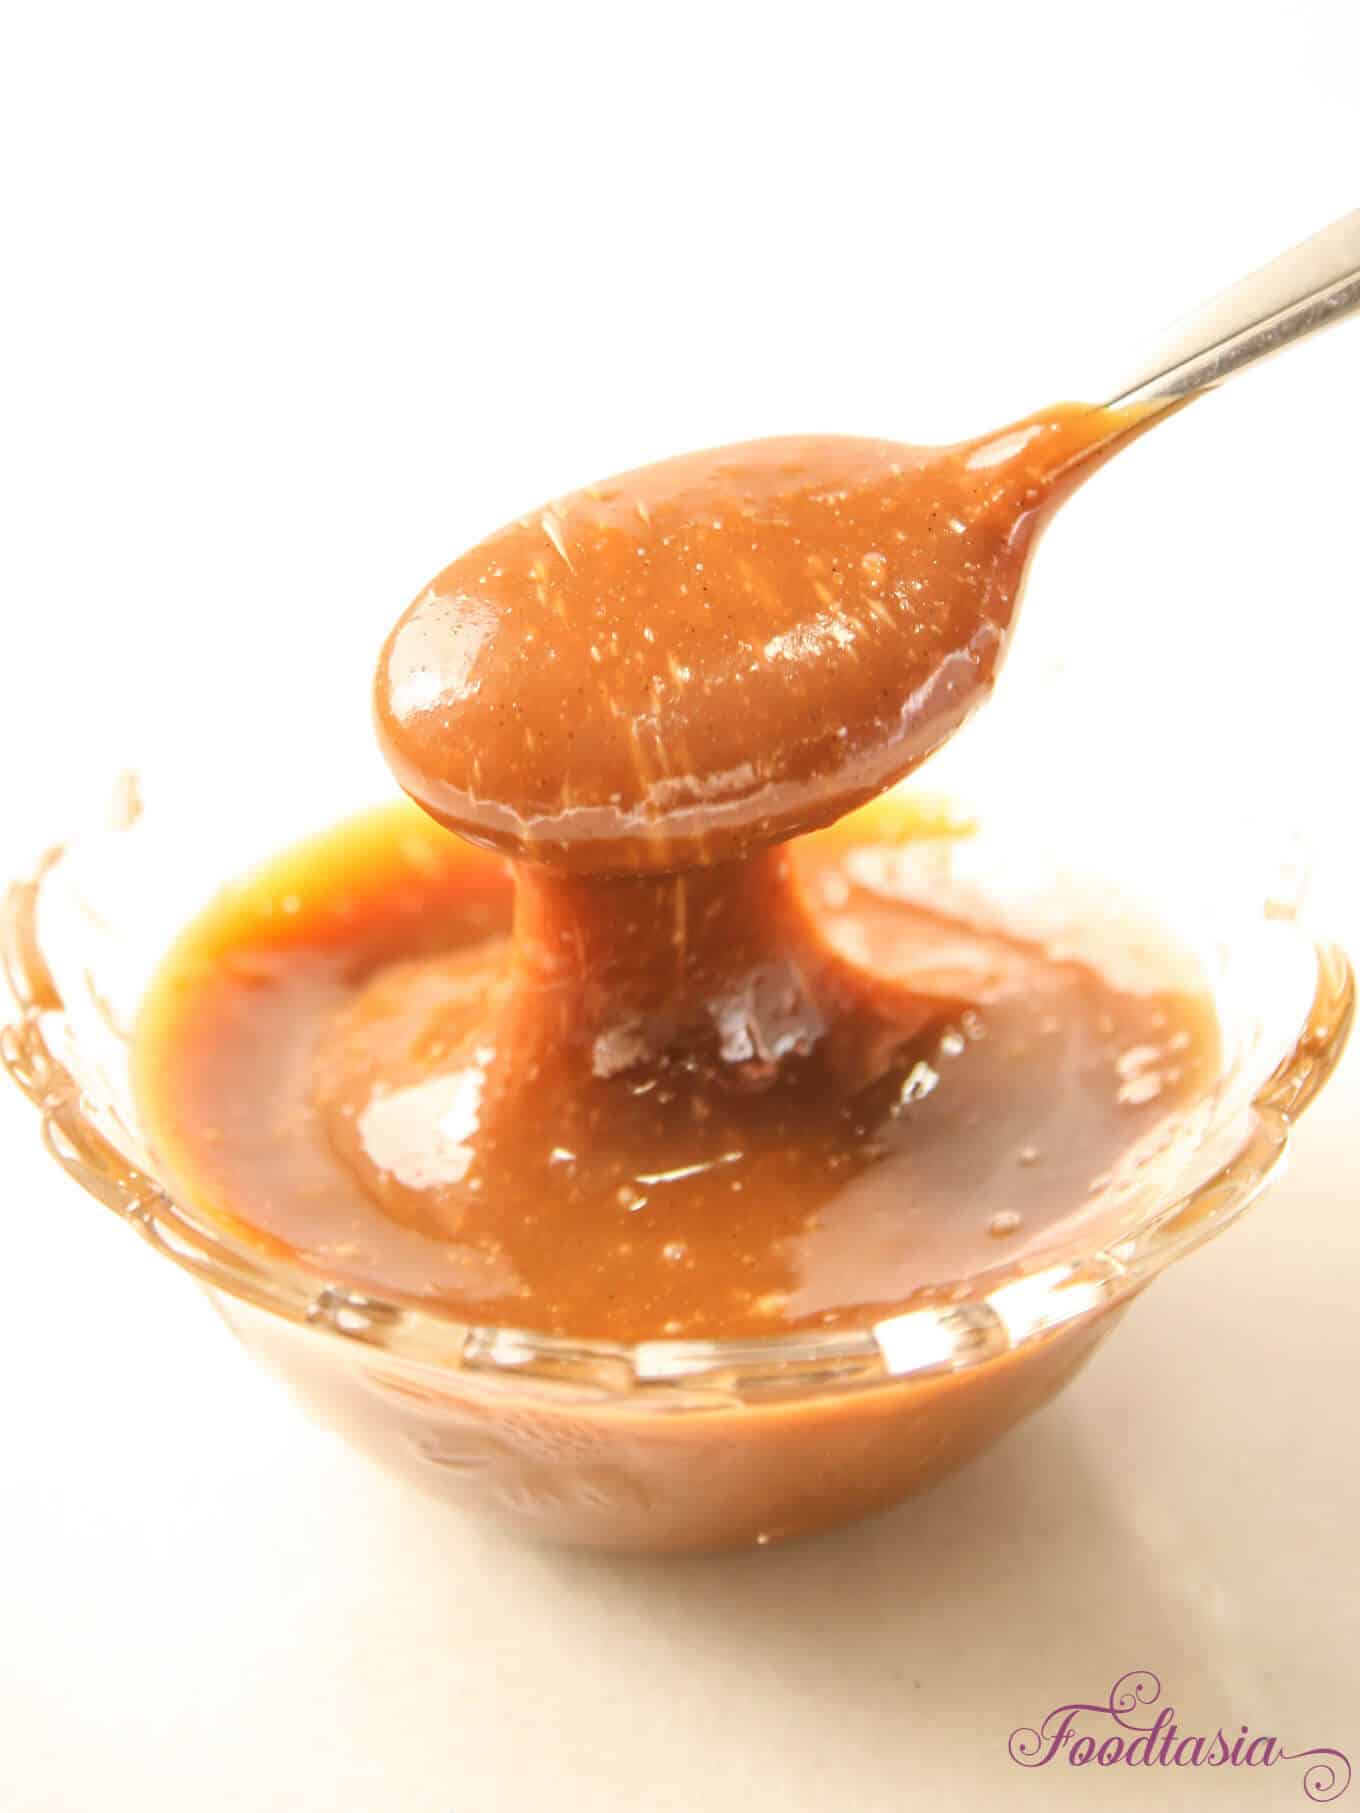 Deliciously smooth and luscious caramel sauce that is the best I've ever tasted. Pure caramel deliciousness with specks of vanilla bean and perfect texture.